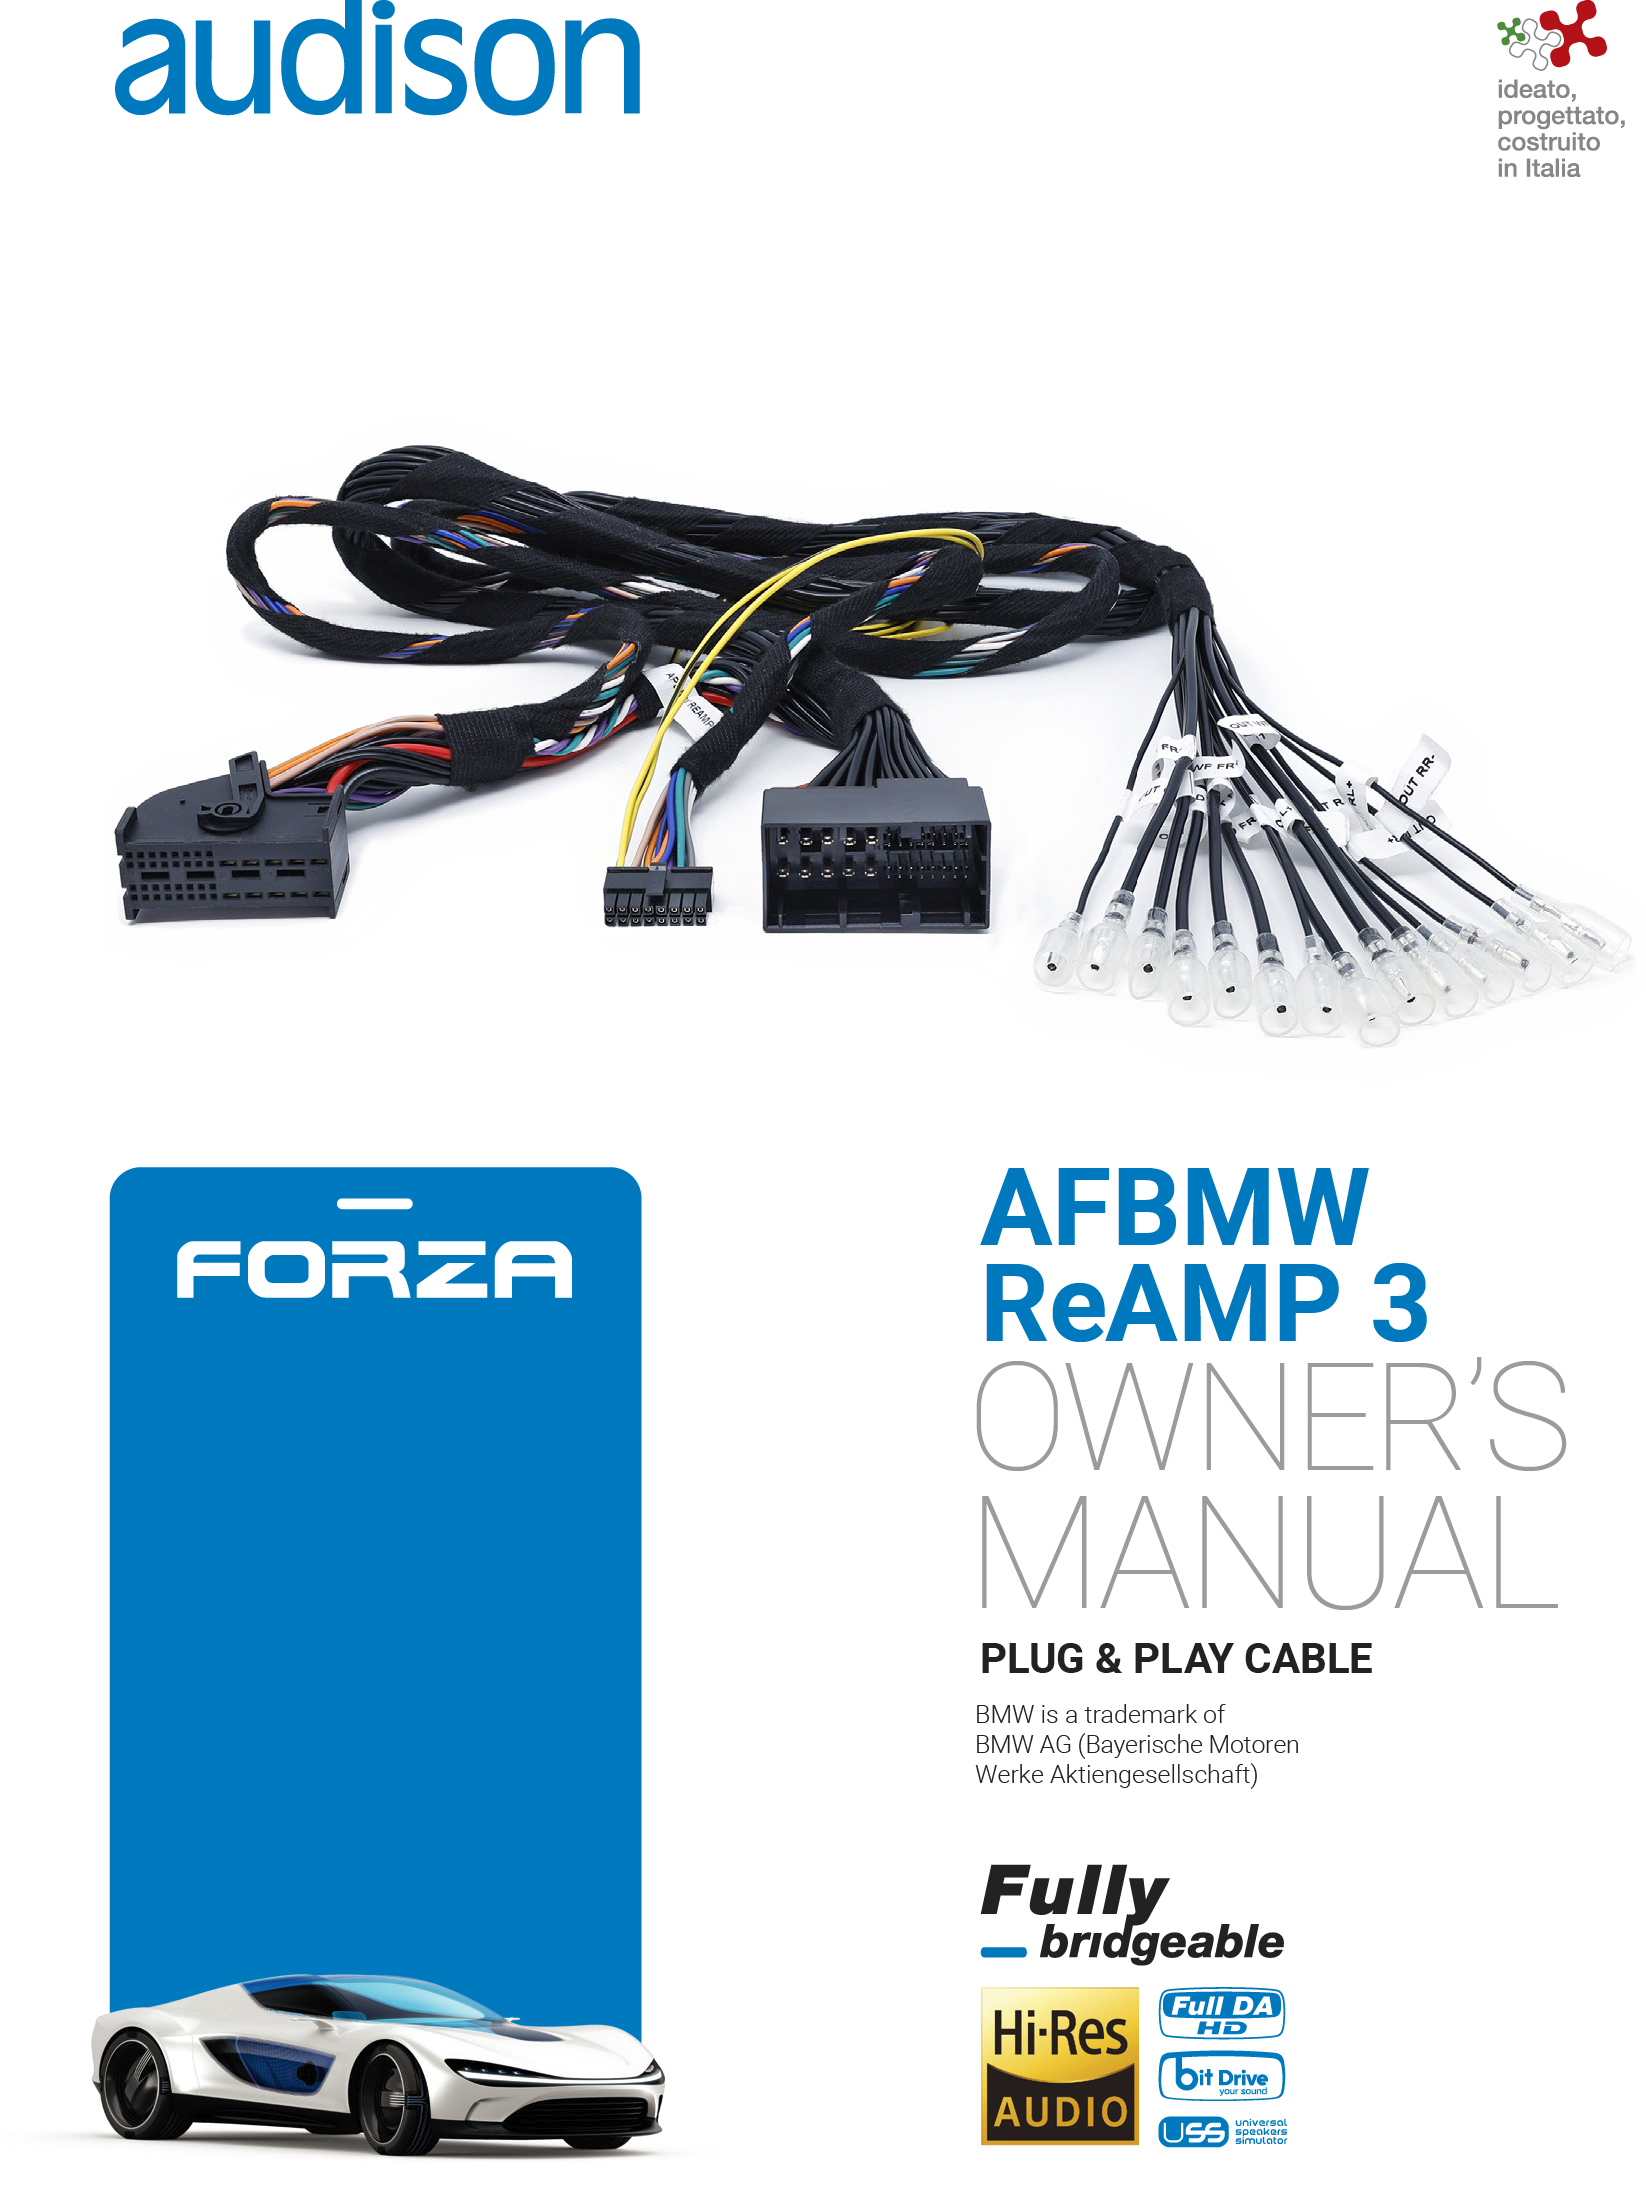 cop_Owners_manual_AFBMW_P_P_Reamp_3_rev22A_x_Web.jpg